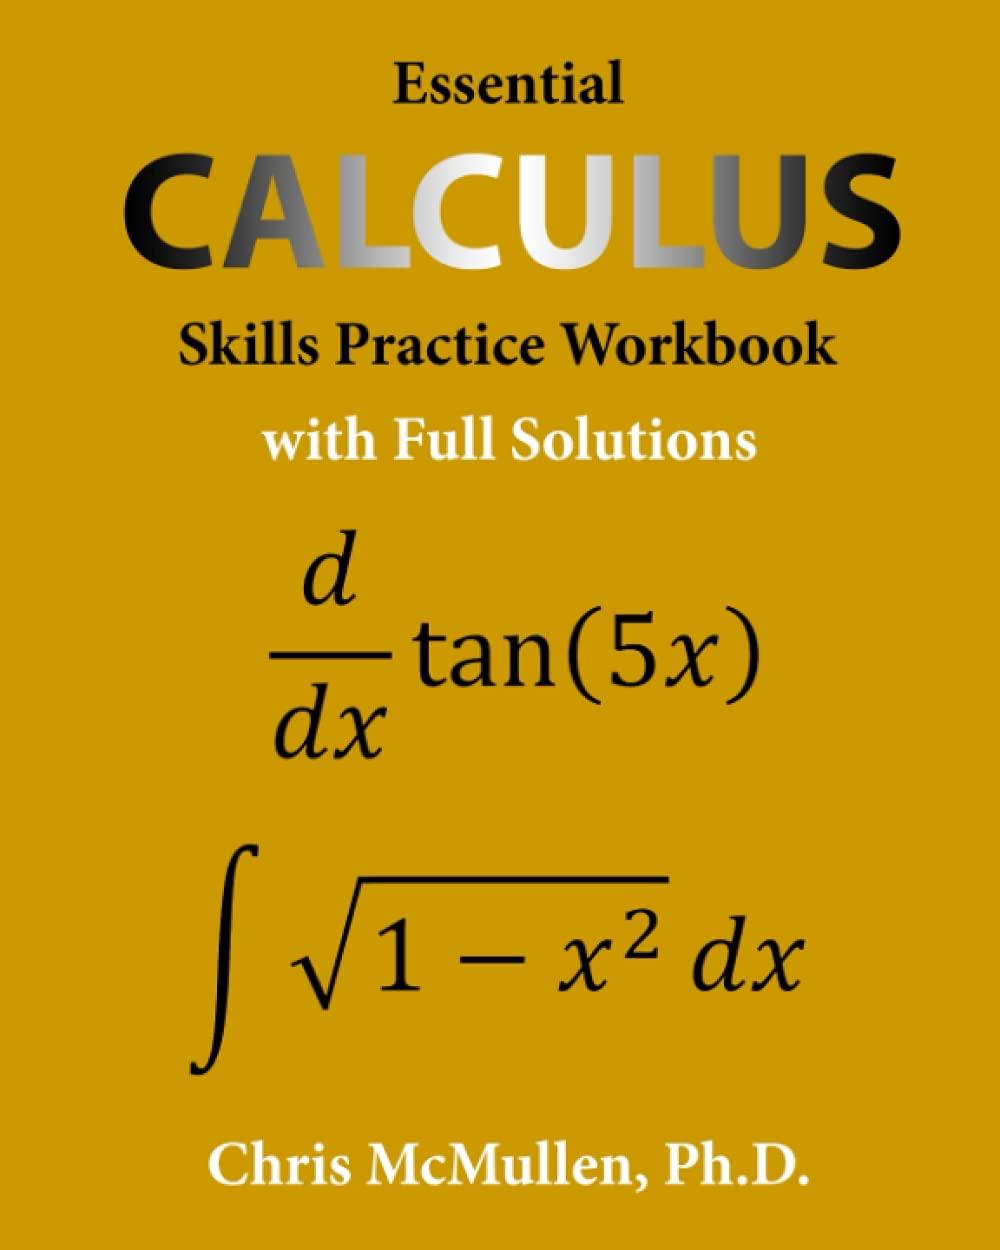 essential calculus skills practice workbook with full solutions 1st edition chris mcmullen 1941691242,